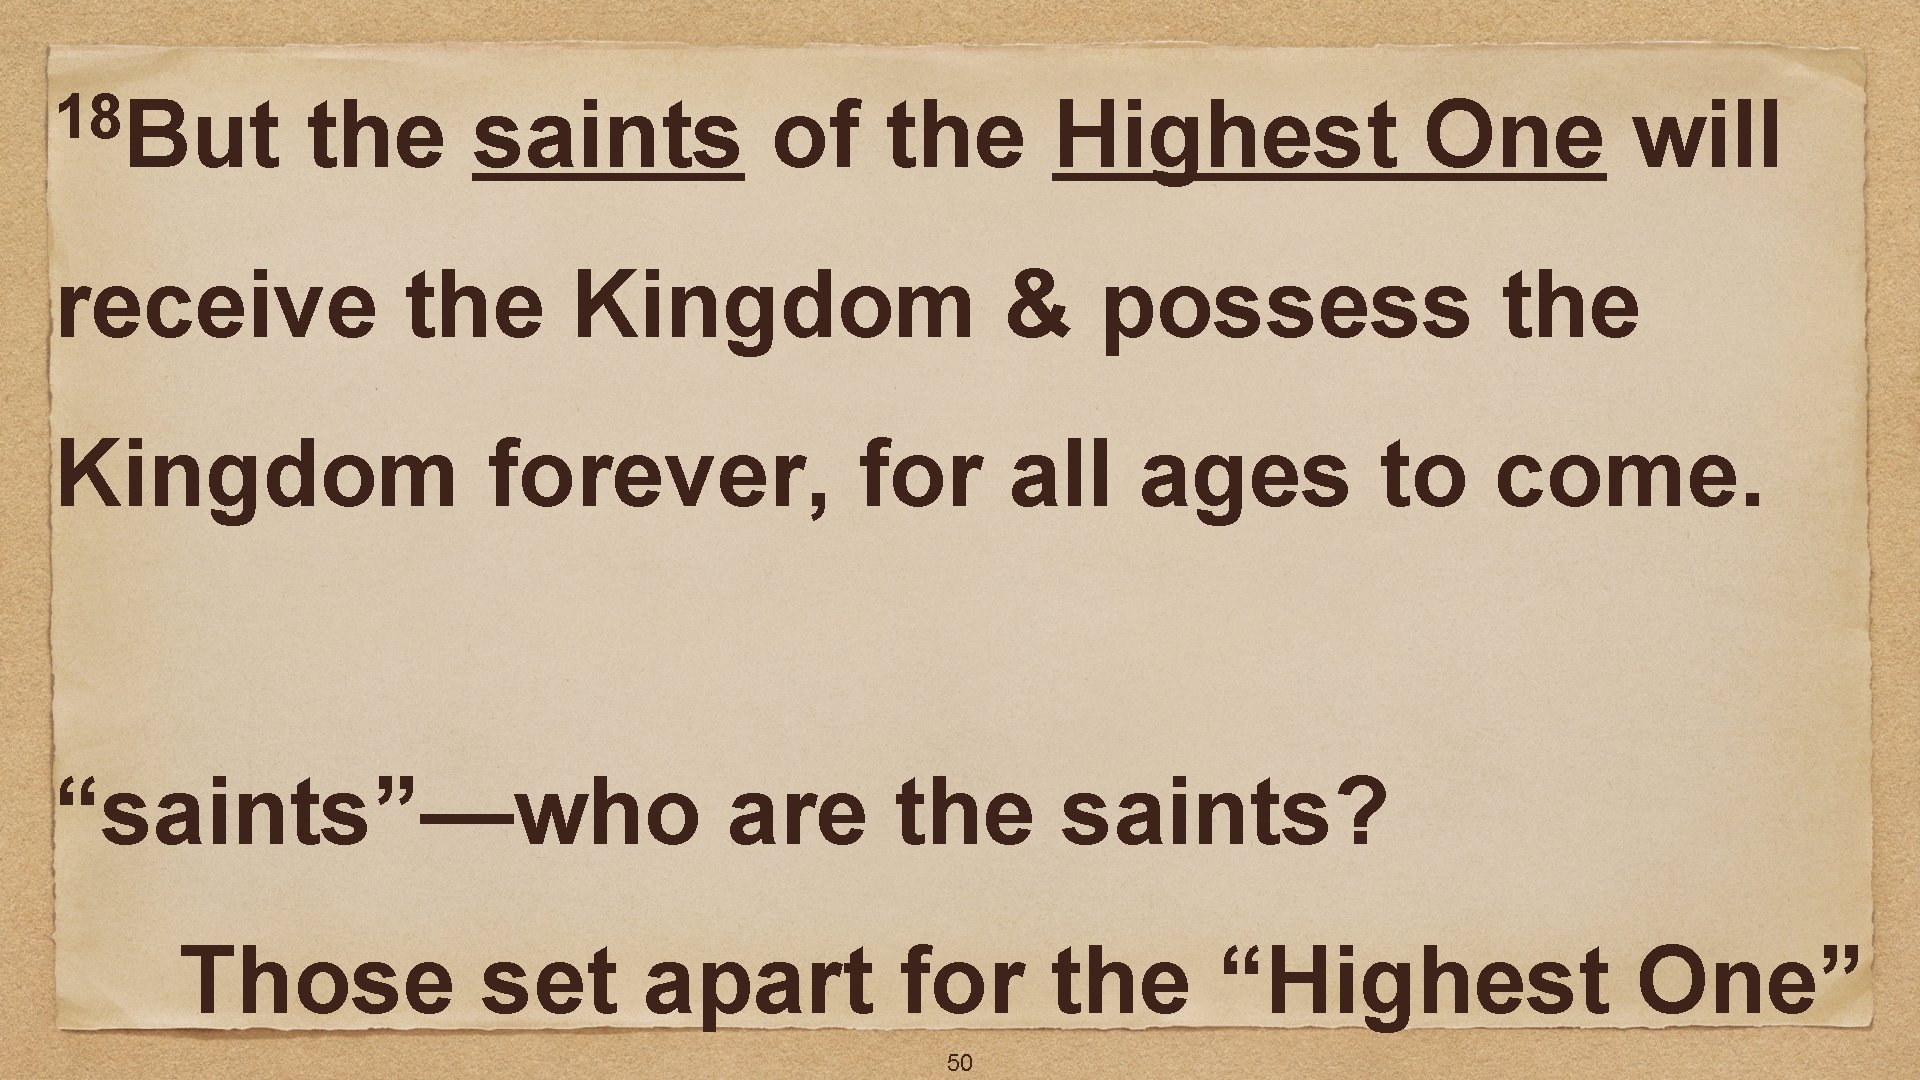 18 But the saints of the Highest One will receive the Kingdom & possess